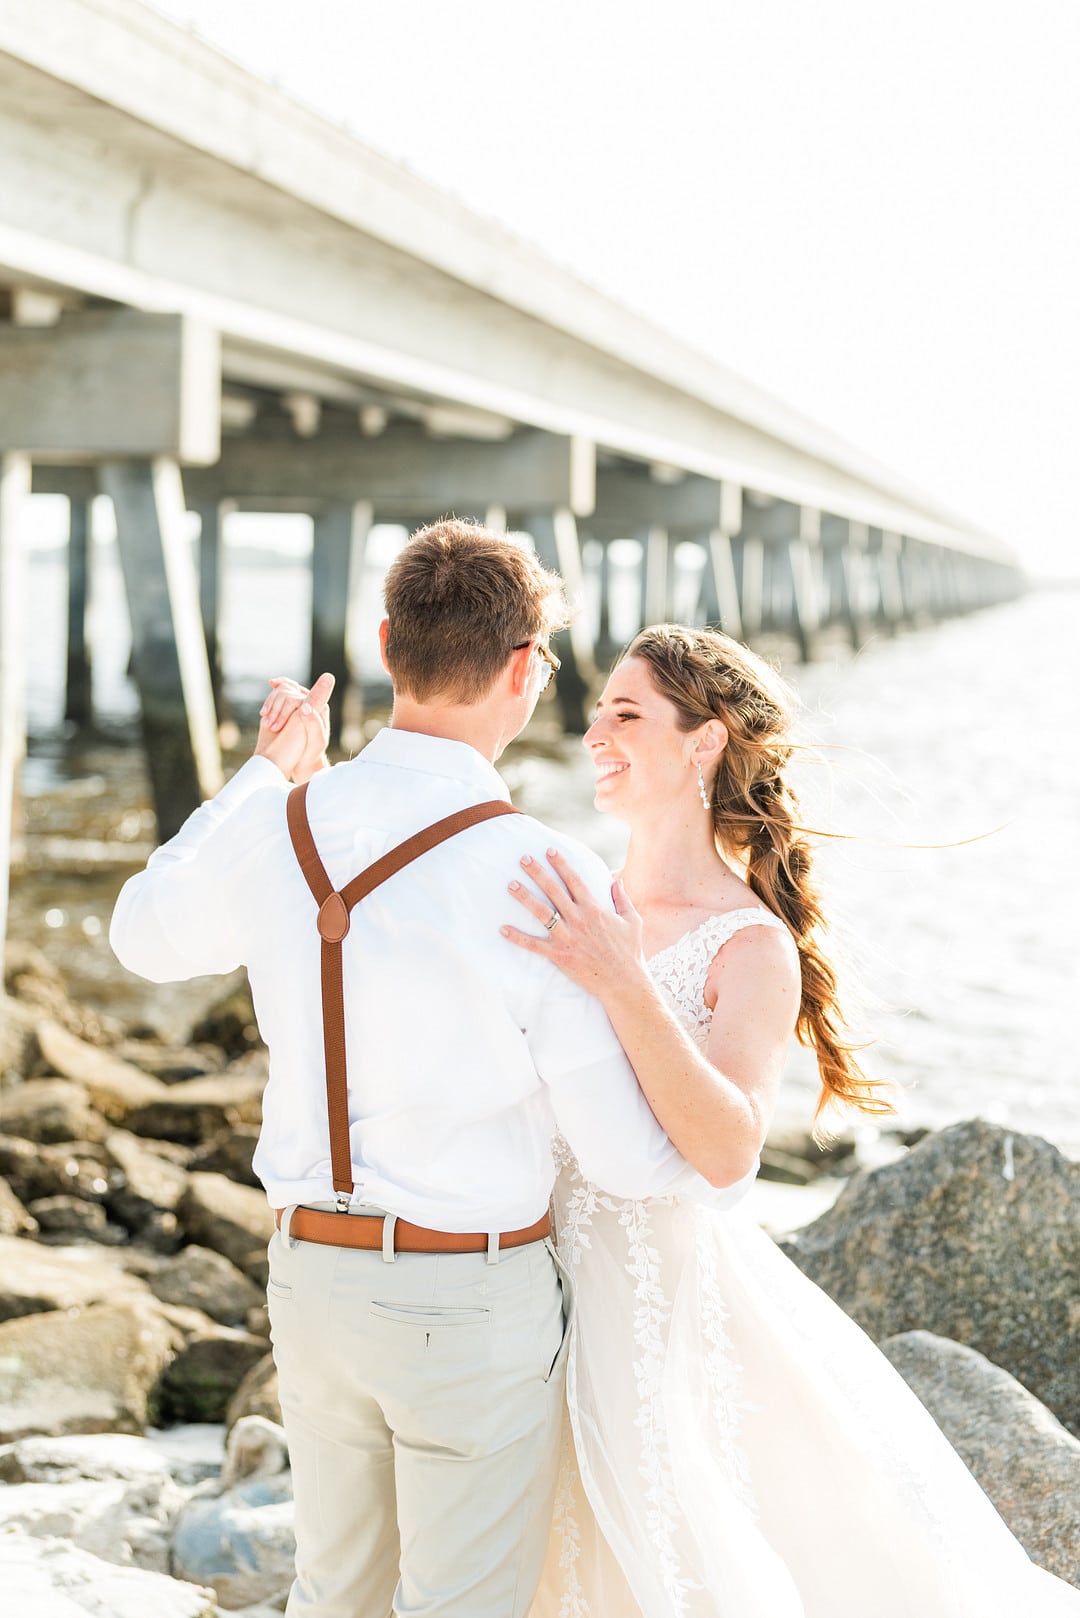 Romantic, Spring Styled Wedding with Horses on the Beach_Christine Austin Photography_©christineaustinphotography_2021_RomanticBeachStyledShoot_Austin+Naomi_72_low